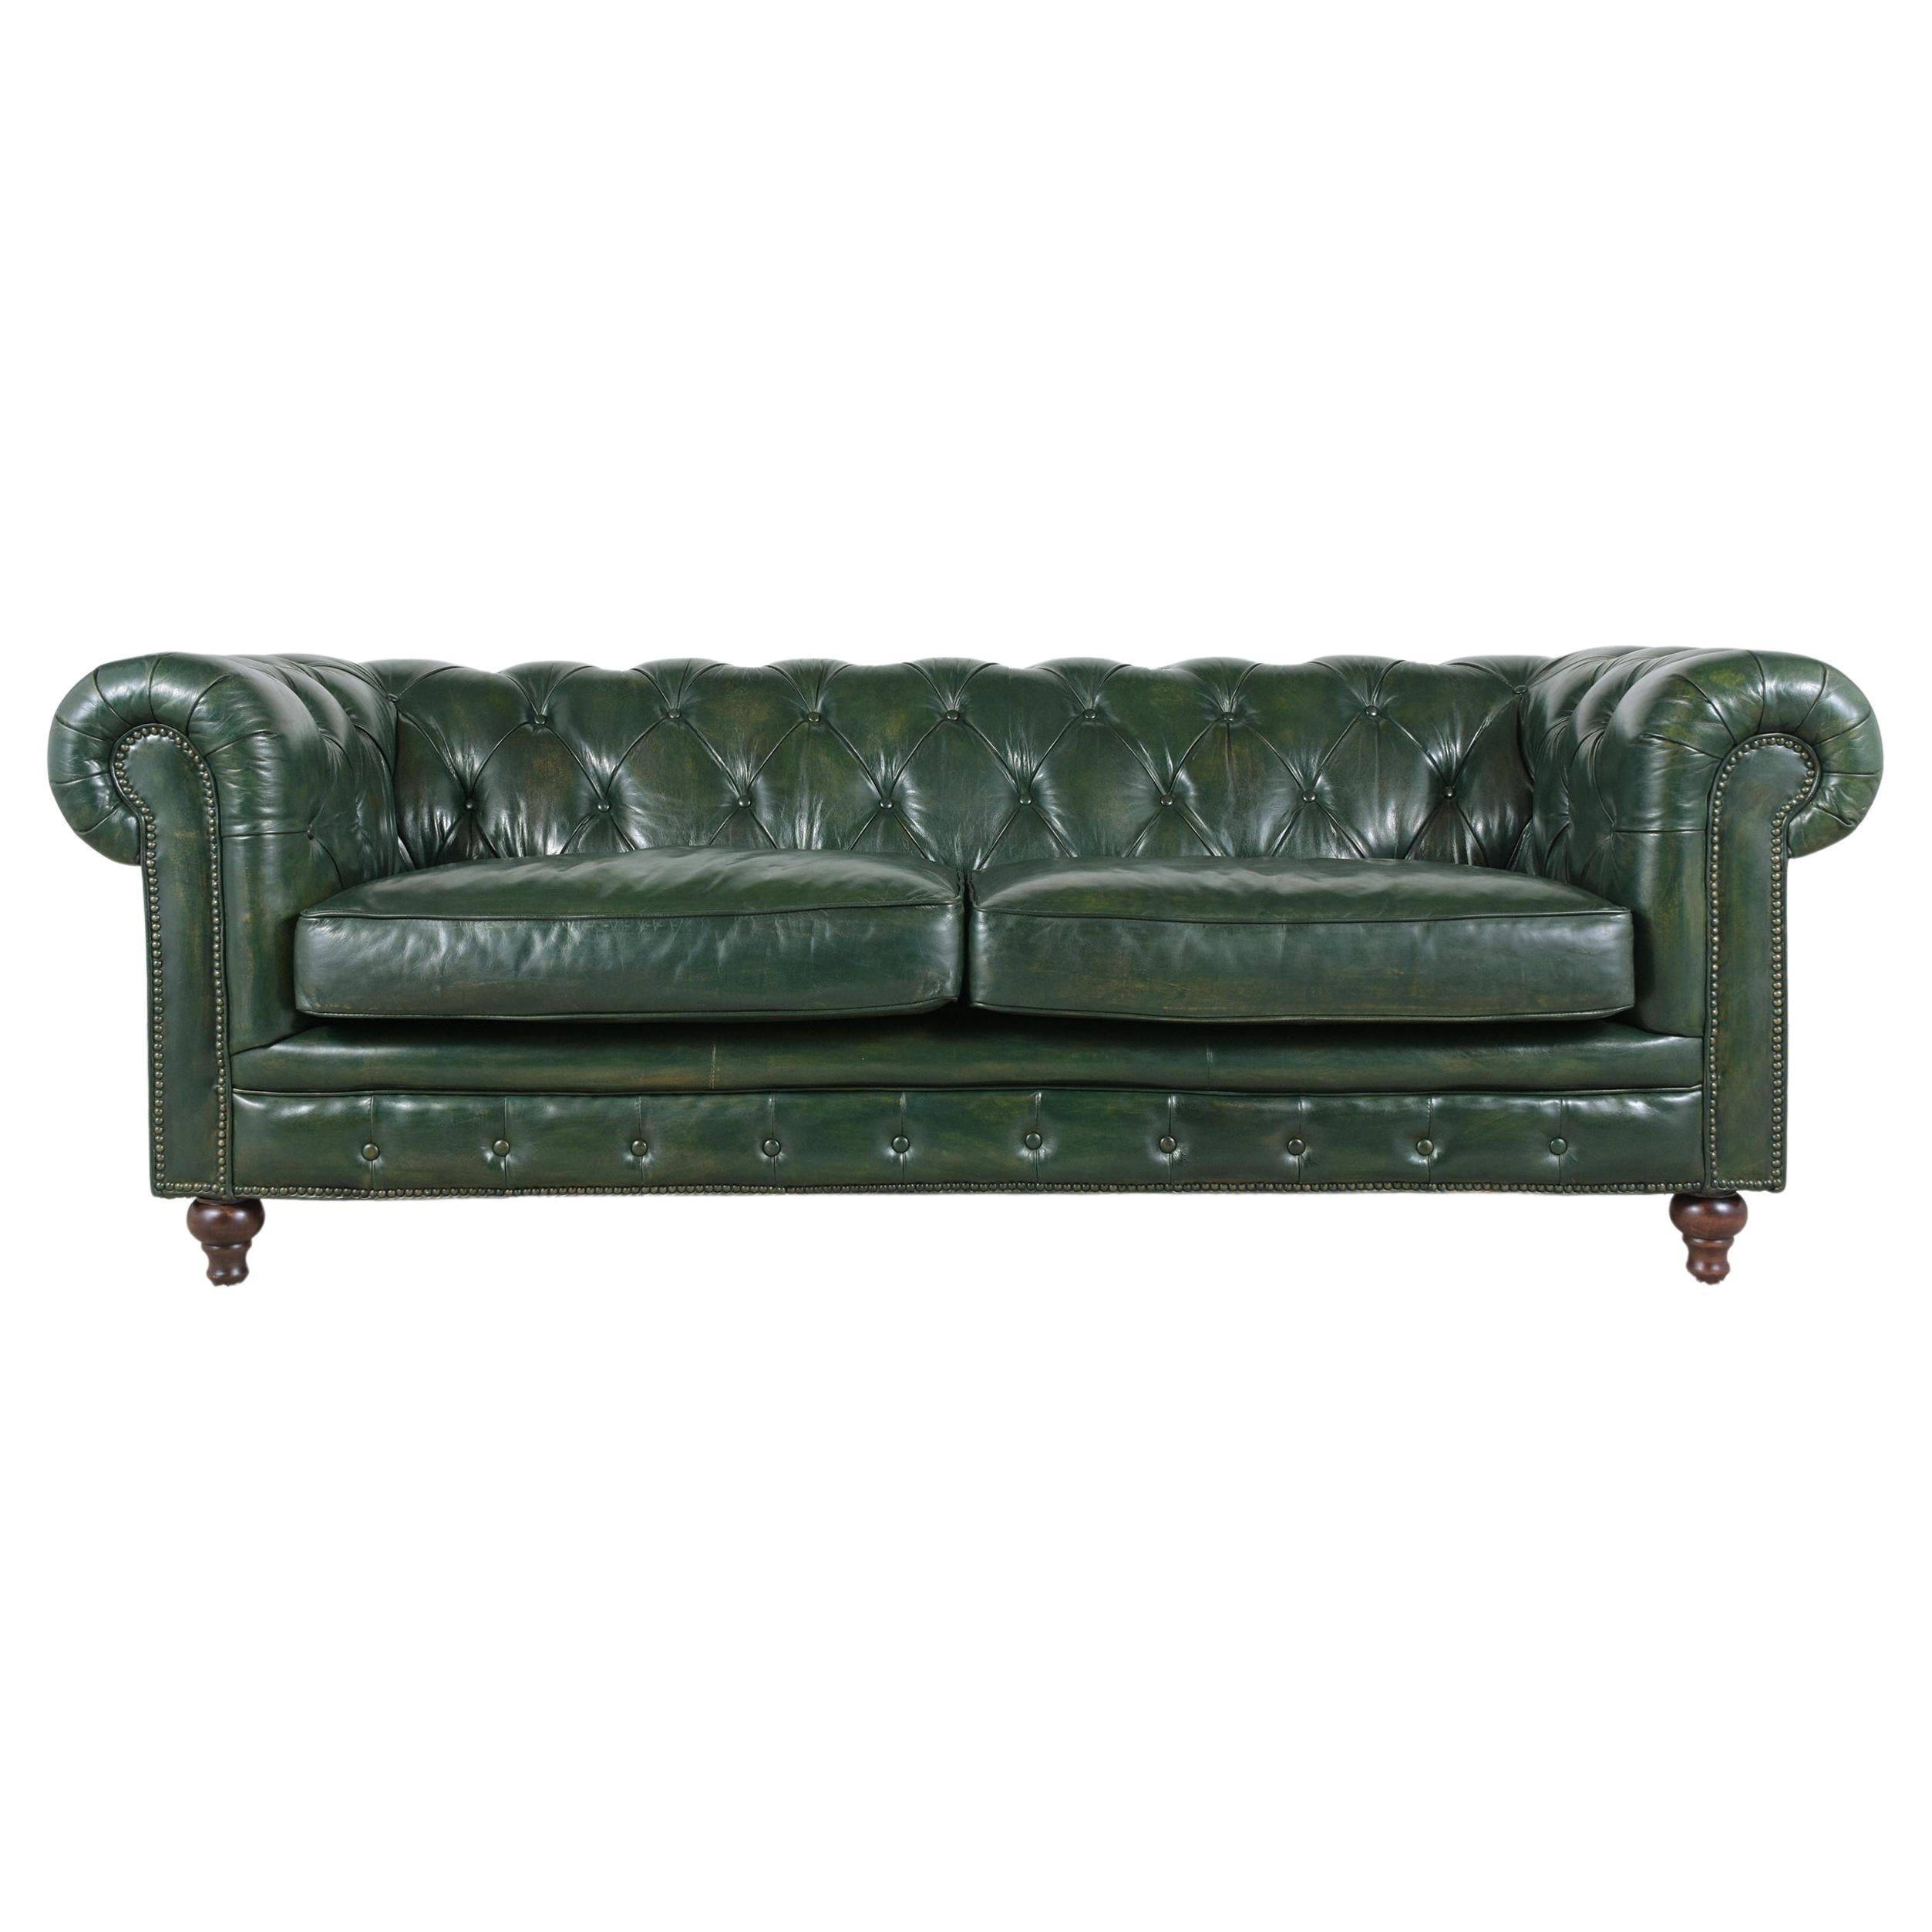 An extraordinary vintage chesterfield sofa in great condition that has been completed restored by our craftsmen. This fabulous sofa features a round tufted backrest & arms, offers a two-seat cushion all covered in leather newly dye in green color